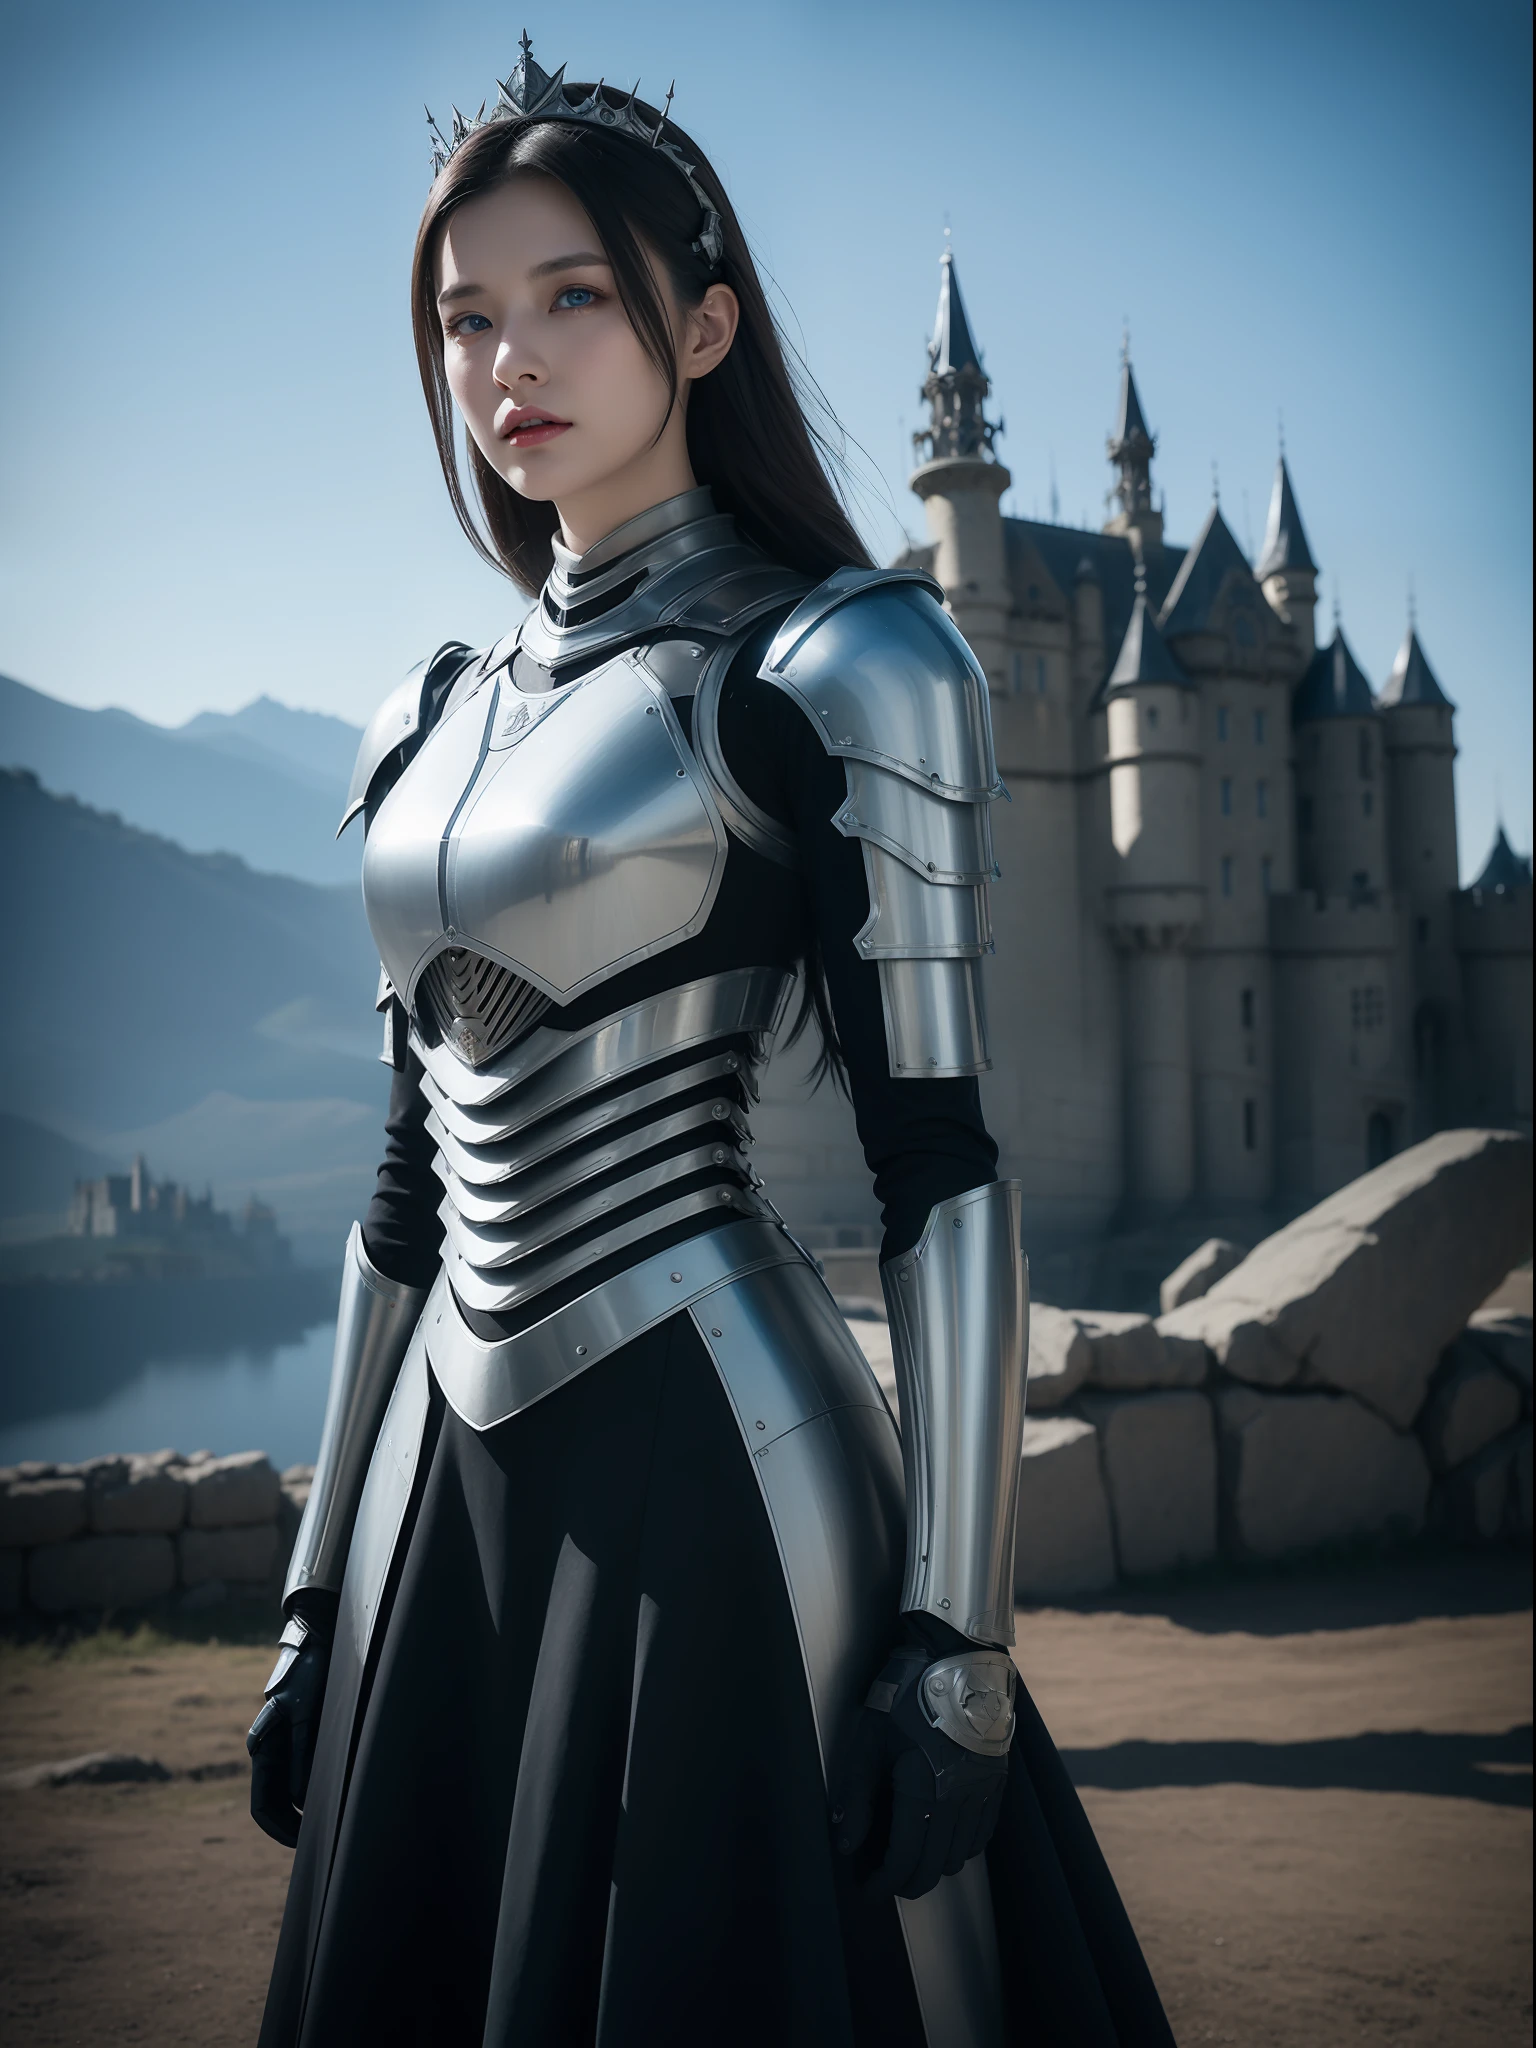 Masterpiece, best quality, high resolution, 8K, Portrait, realistic photo,（ Combining clothes with Korean fashion designs），Digital photography, full body, 1 16 year old girl, (cyborg), beautiful blue gray gradient long hair, blue eyes, intricate, elegant, Highly detailed, Evil Crown, Black dress, ,silver metal exoskeleton armor, Intricate knight's hollow armor,power armor, cutout design, Mechanical structure, photo pose, solemn,, red lips, From the film Kingsglaive Final Fantasy XV.Metallic texture, oc rendering，Reflective texture, ((Clothing cutting)), ((With castles and giant moster in the background))